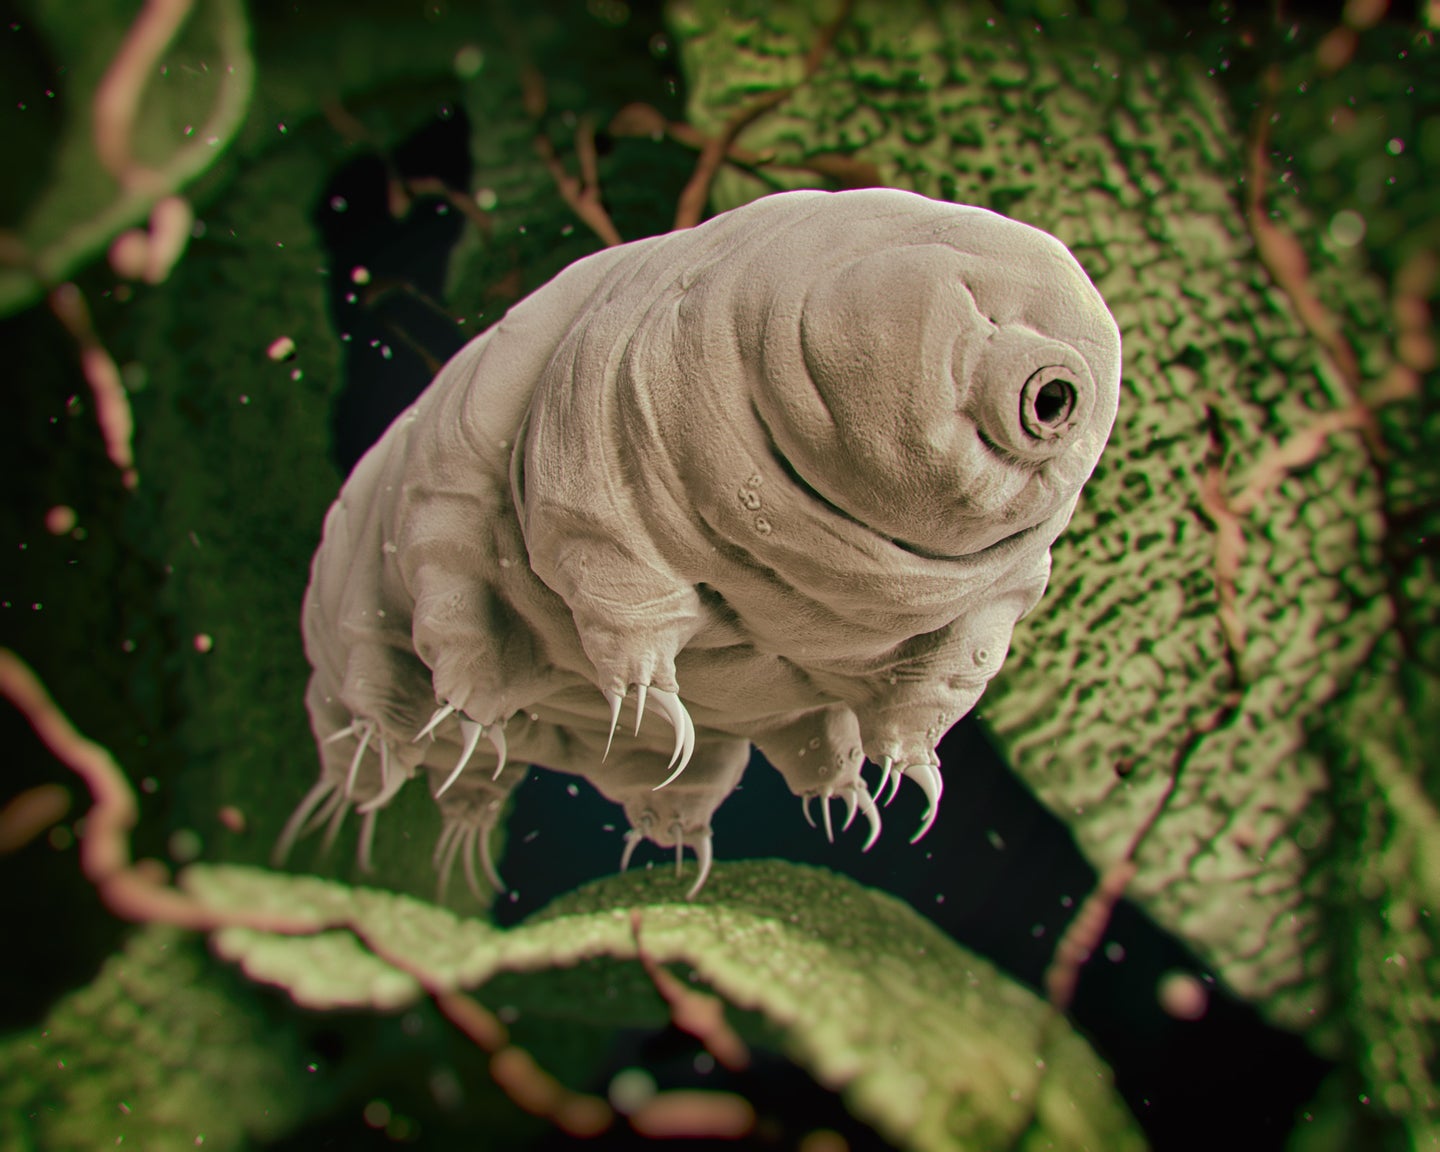 a 3d rendering of a tardigrade or water bear in a green aquatic environment